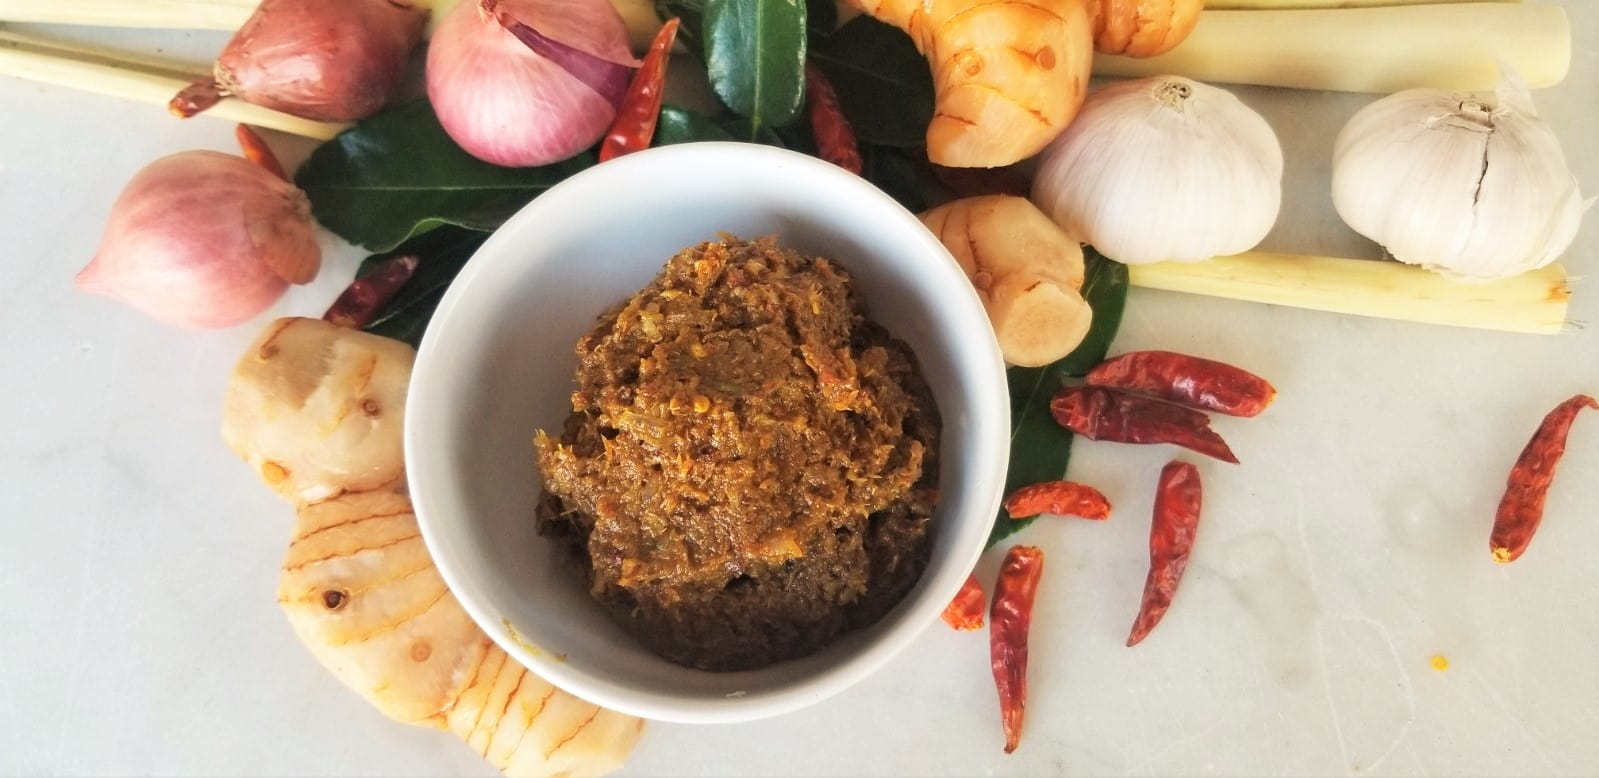 Yellow Curry Paste Ingredients